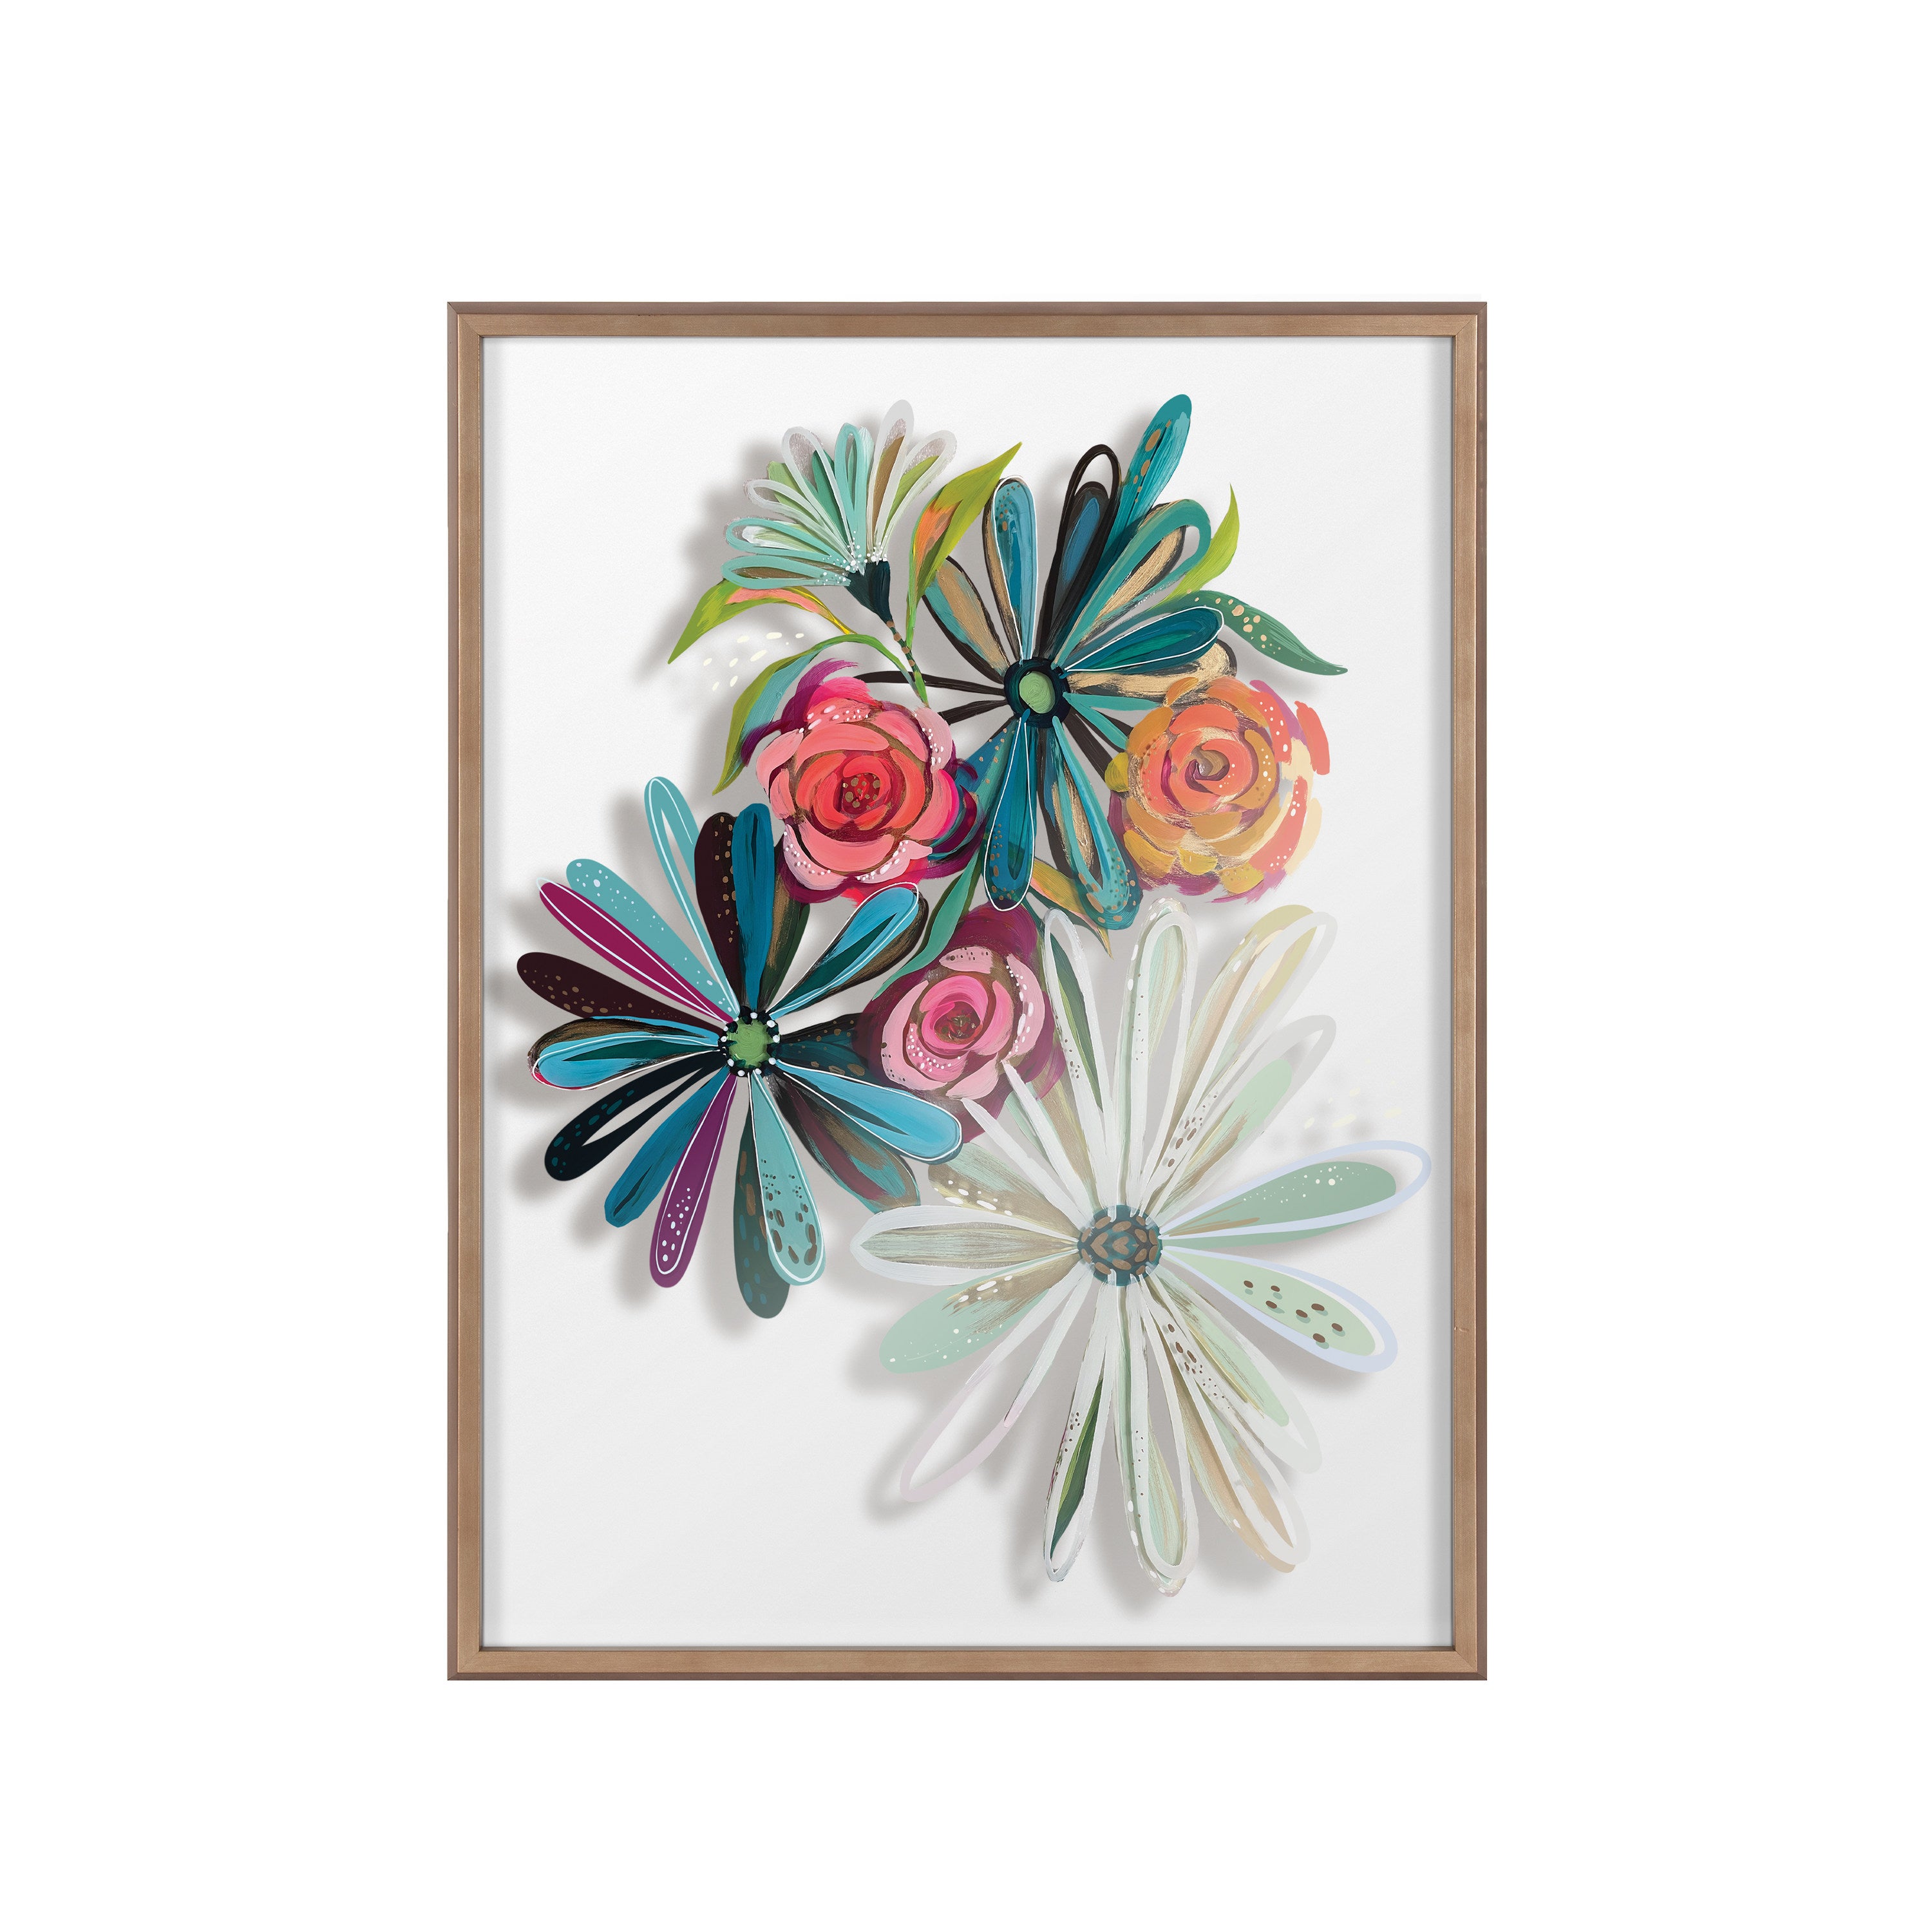 Blake Flowers on Glass 2 Whole Flowers Framed Printed Art by Jessi Raulet of Ettavee